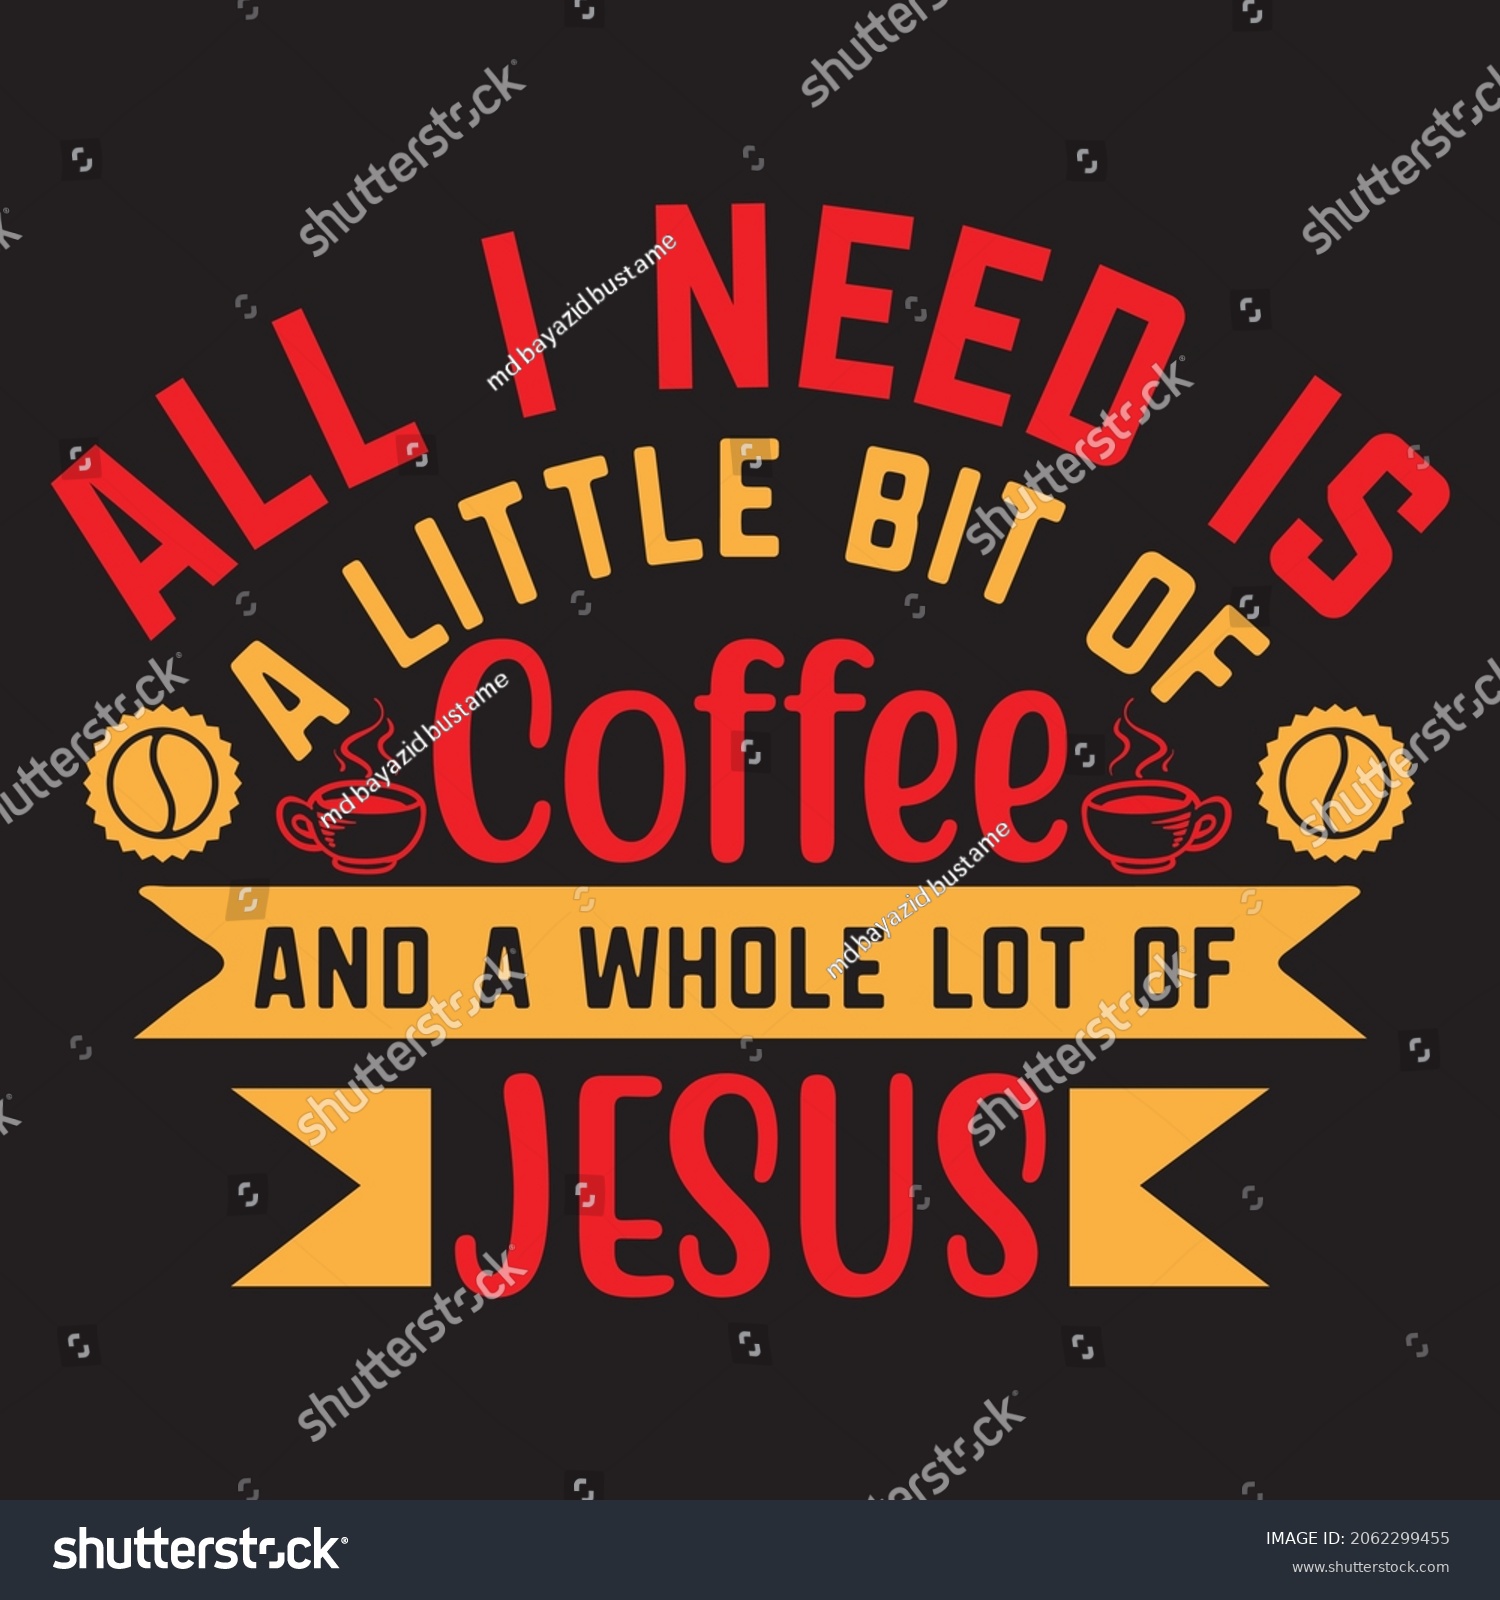 SVG of ALL I NEED IS A LITTLE BIT OF COFFEE AND A WHOLE LOT OF JESUS,Svg design,Vector file. svg